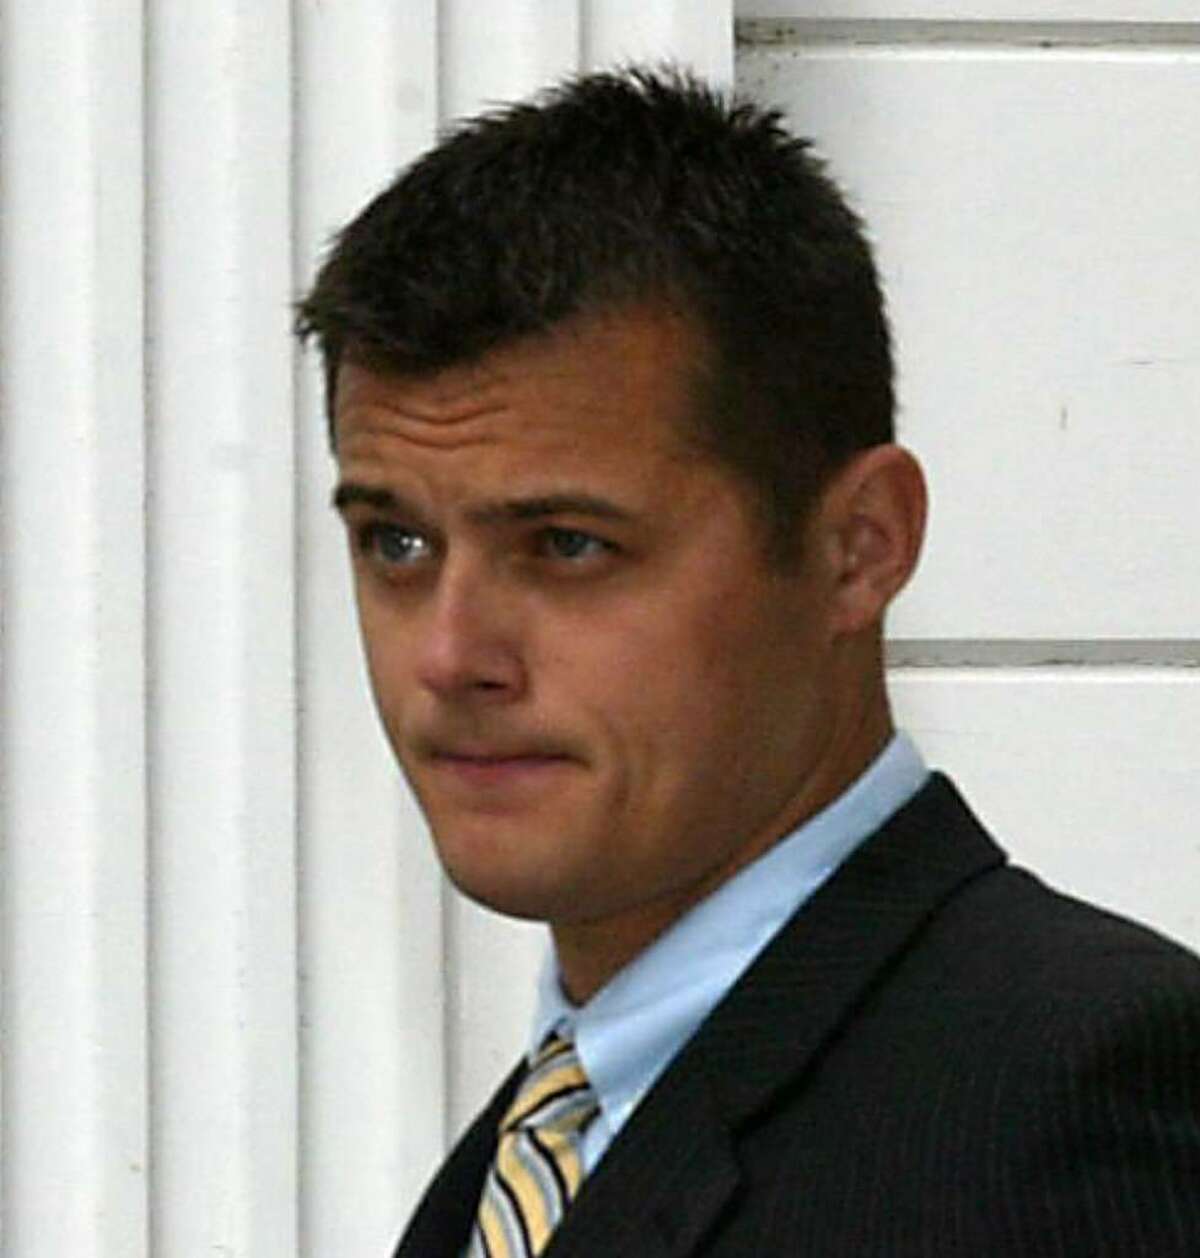 Jared Rohrig of Milford. Rohrig, a suspended Orange police officer, leaves Milford Superior Court on Sept. 8th, 2009 after being arraigned on rape charges. Rohrig allegedly tried to pass himself off as his twin brother during an encounter with his brother's girlfriend.